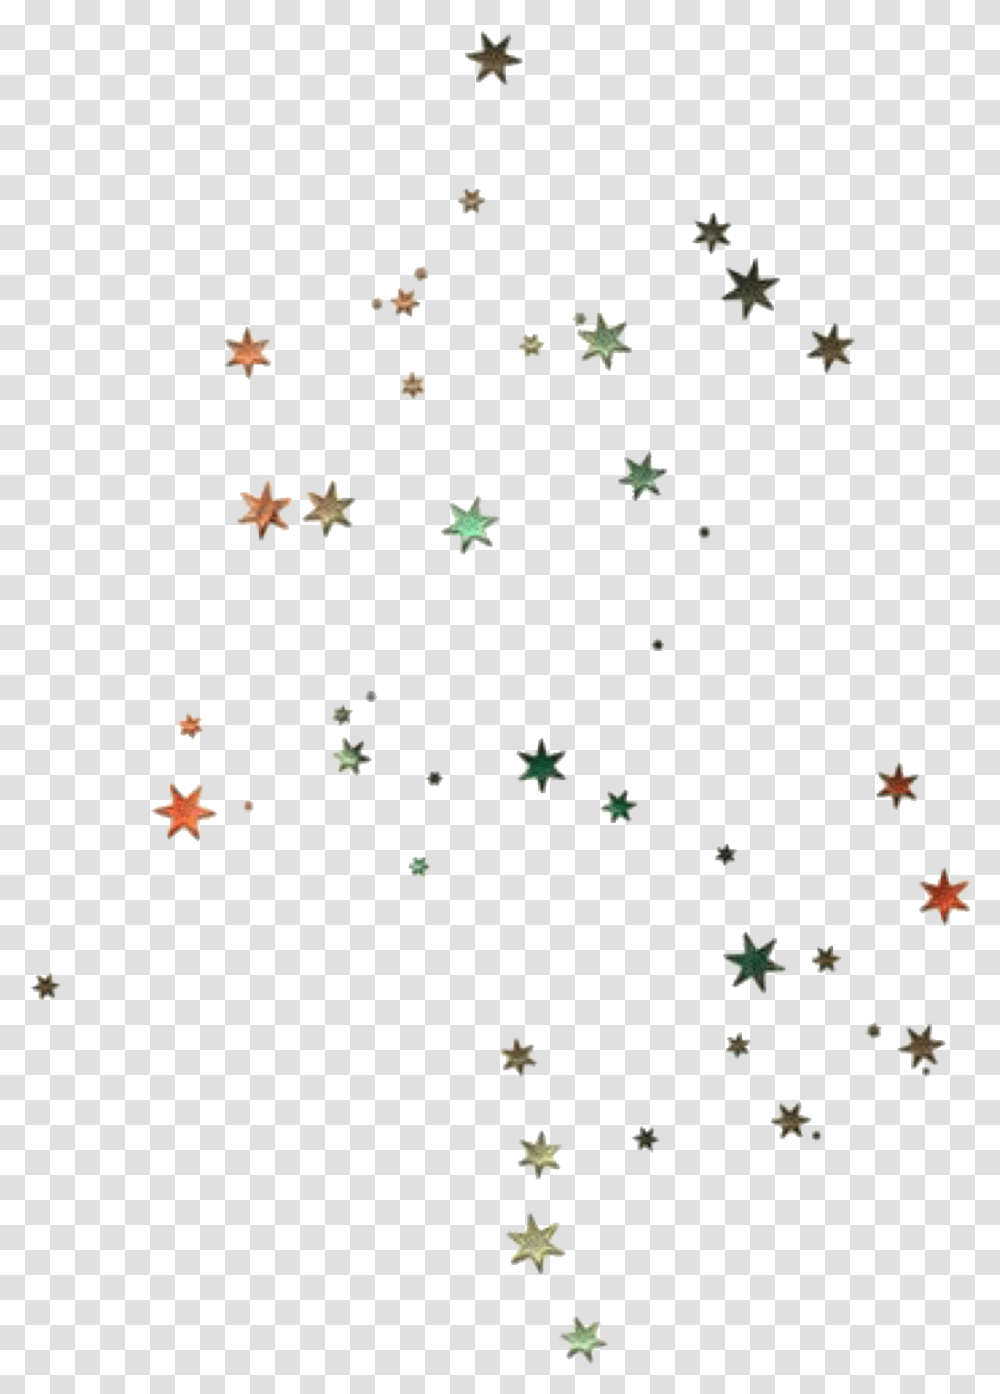 Sticker Stars Scatter Scattered Glitter Tumblr Aesthetic Star Glitter, Jigsaw Puzzle, Game, Leaf Transparent Png